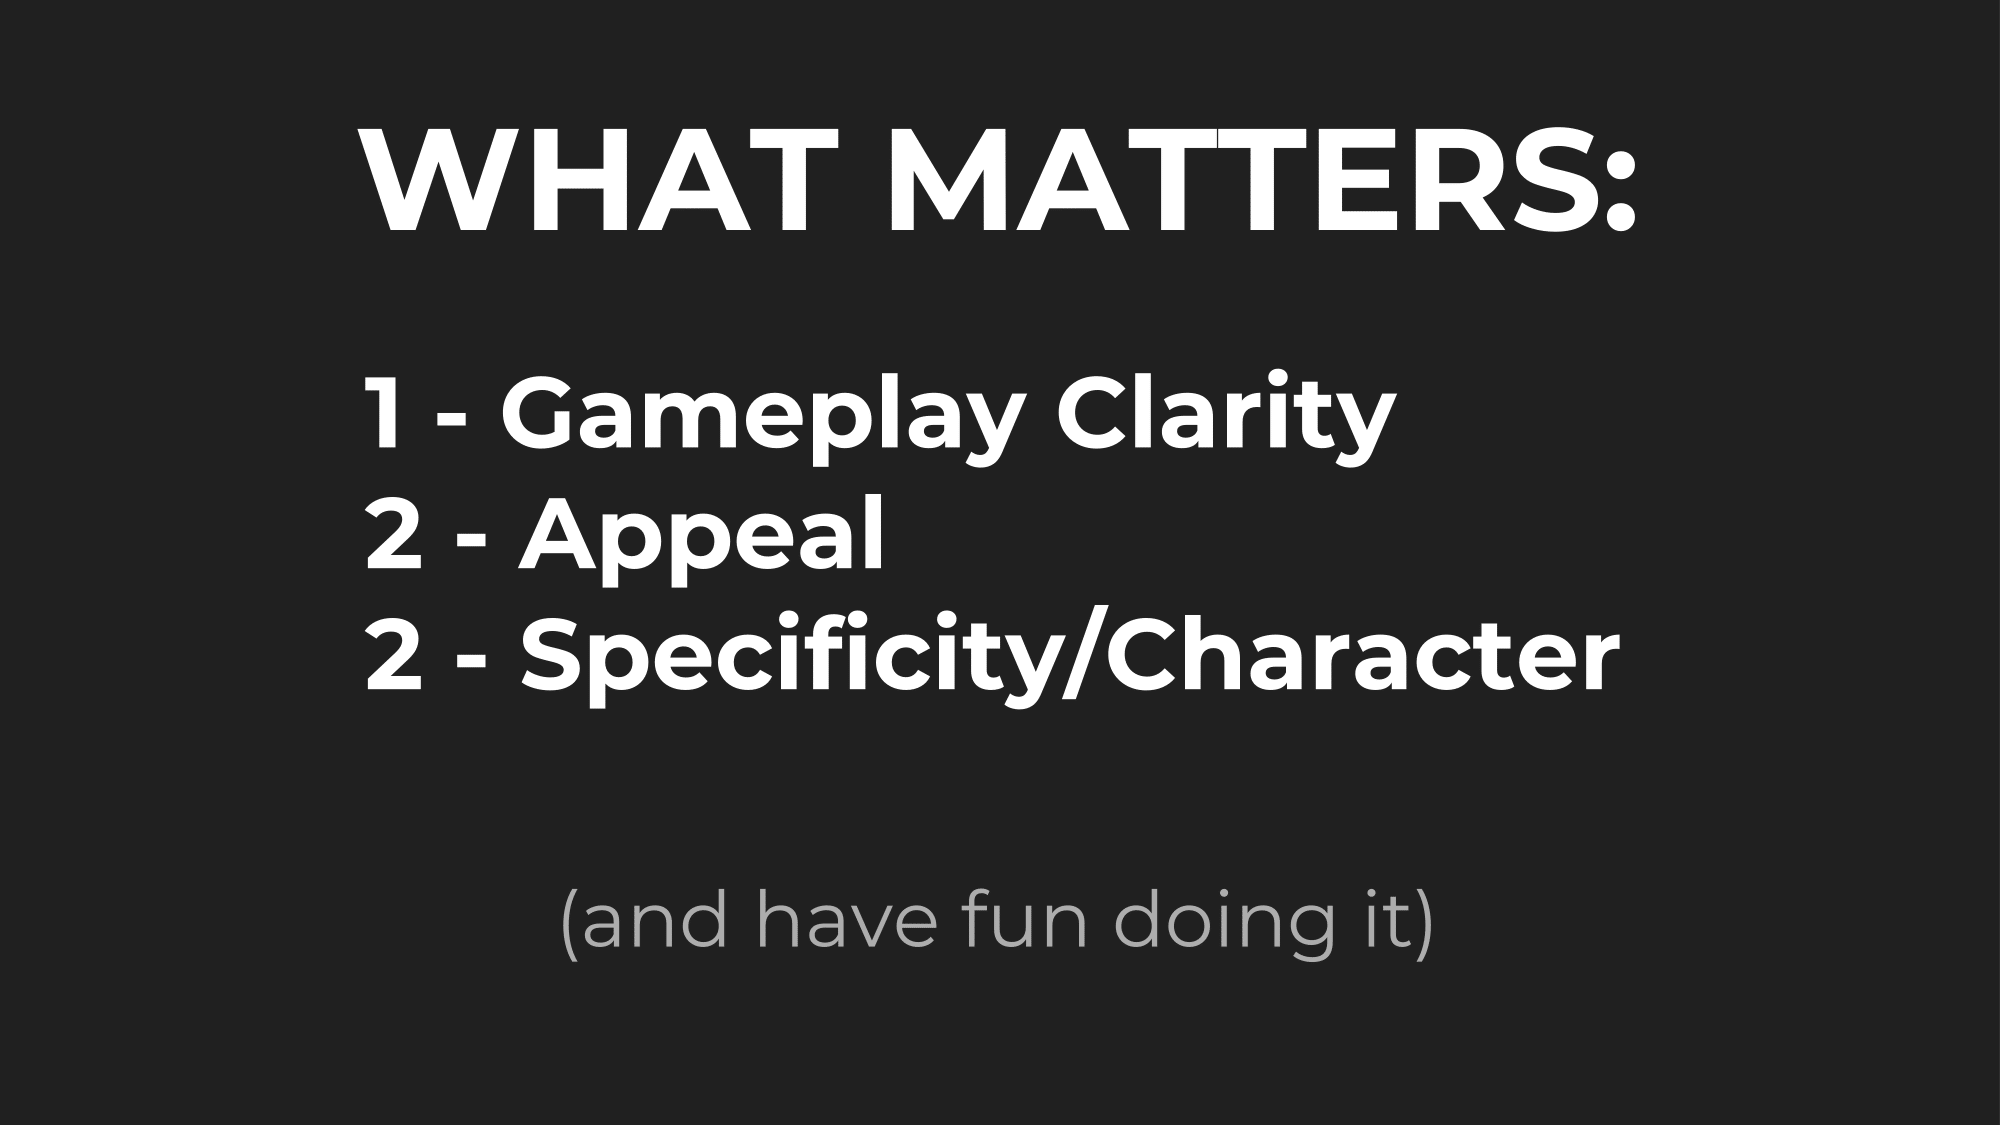 SLIDE: (In descending order of primacy) 1. Gameplay Clarity 2. Appeal 2. Specificity/Character